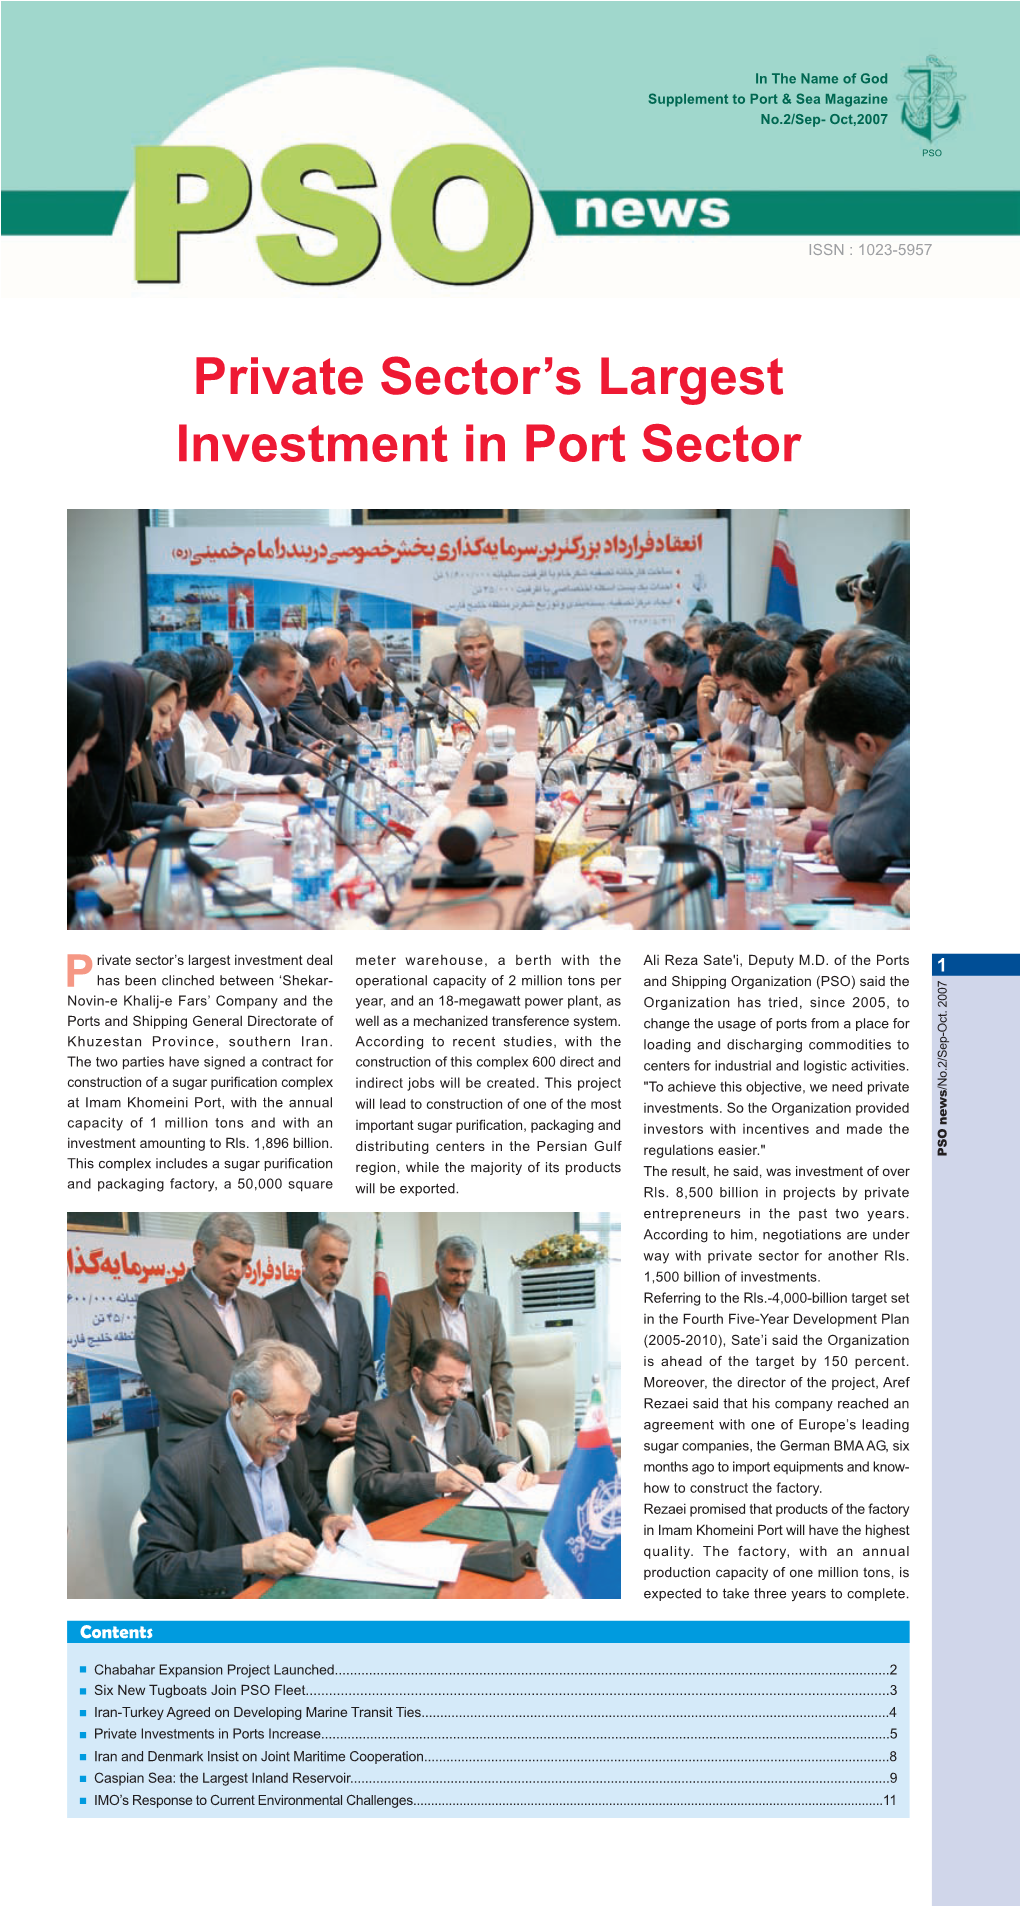 Private Sector's Largest Investment in Port Sector